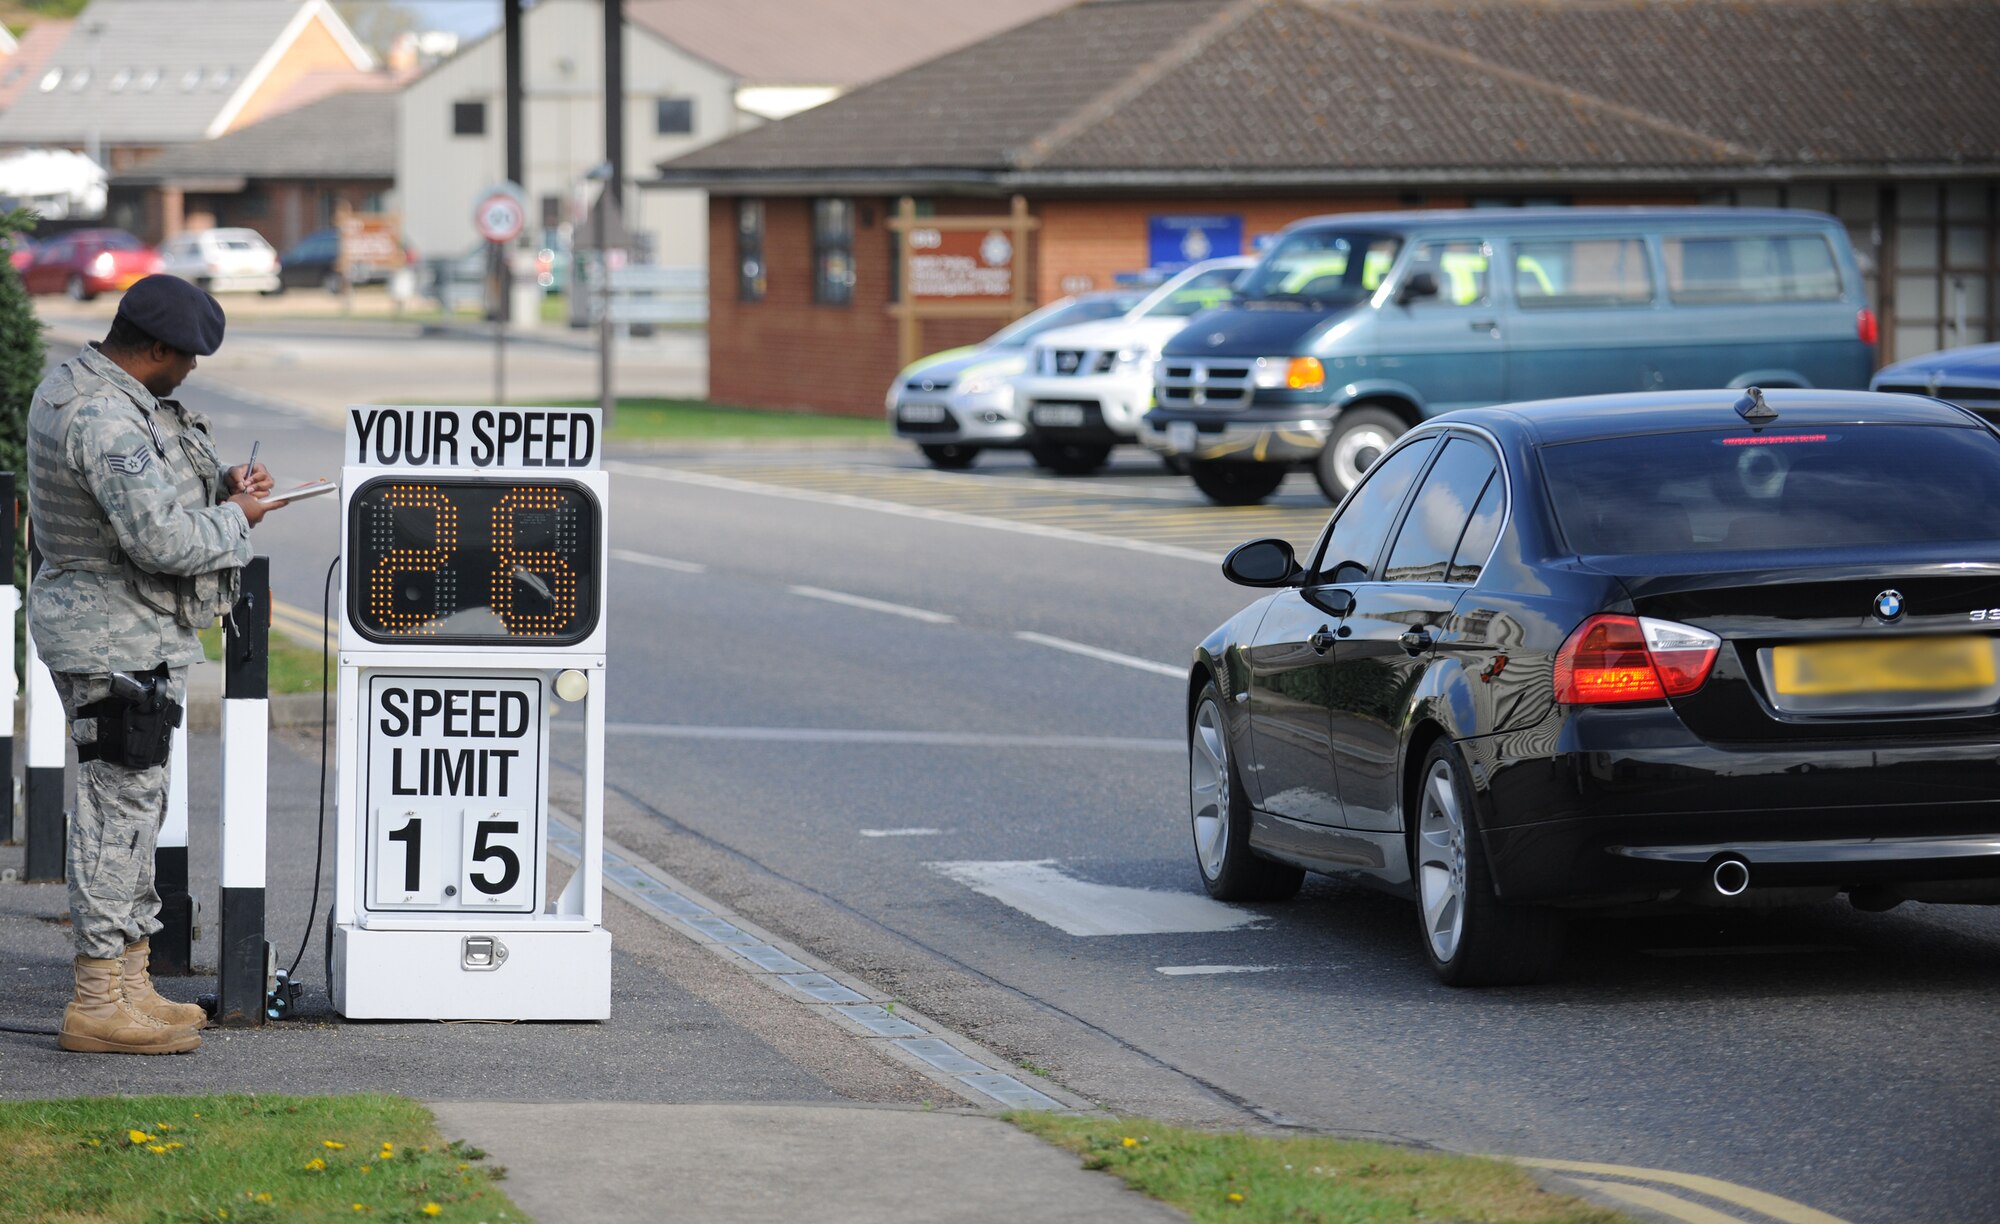 RAF MILDENHALL, England – Staff Sgt. Elvencie Prior, 100th Security Forces Squadron, annotates license plate numbers as vehicles pass a speed camera on RAF Mildenhall April 28. As the weather warms up, and more pedestrians begin to walk, security forces increases its number of speed check points at random times and places on base. (U.S. Air Force photo/ Staff Sgt. Jerry Fleshman)
